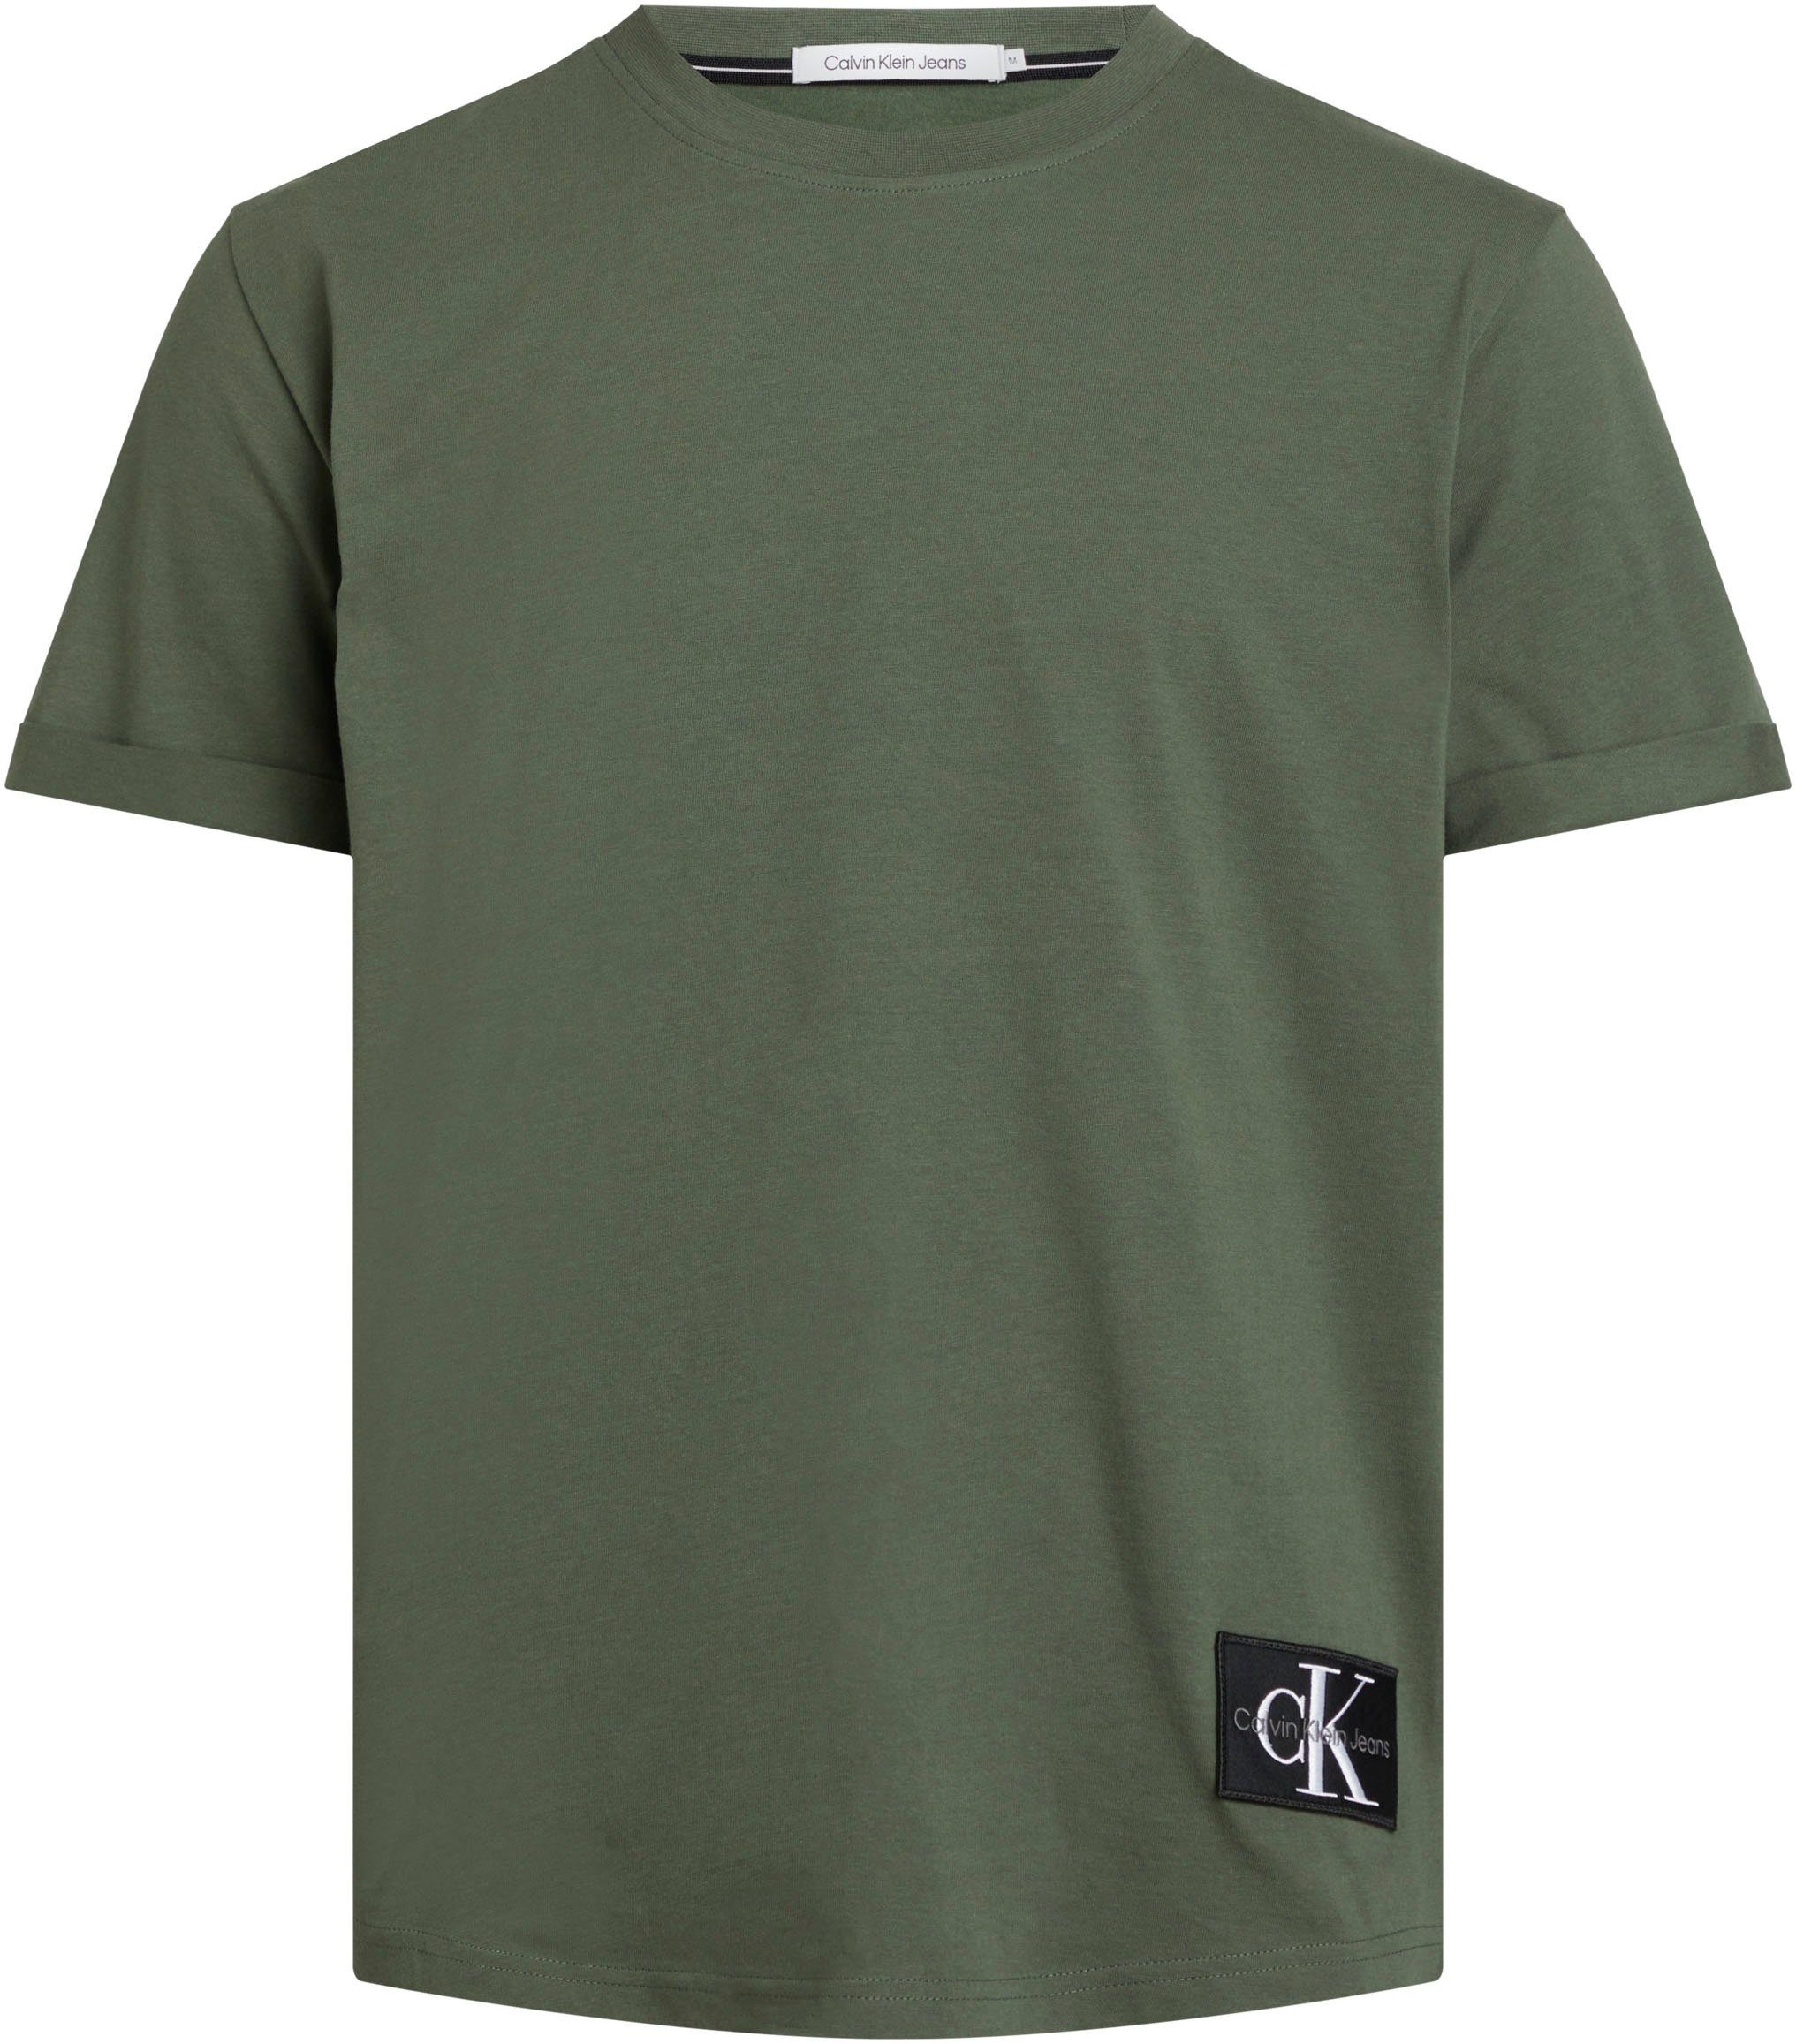 Klein Jeans TURN BADGE Logopatch UP SLEEVE mit Thyme Calvin T-Shirt